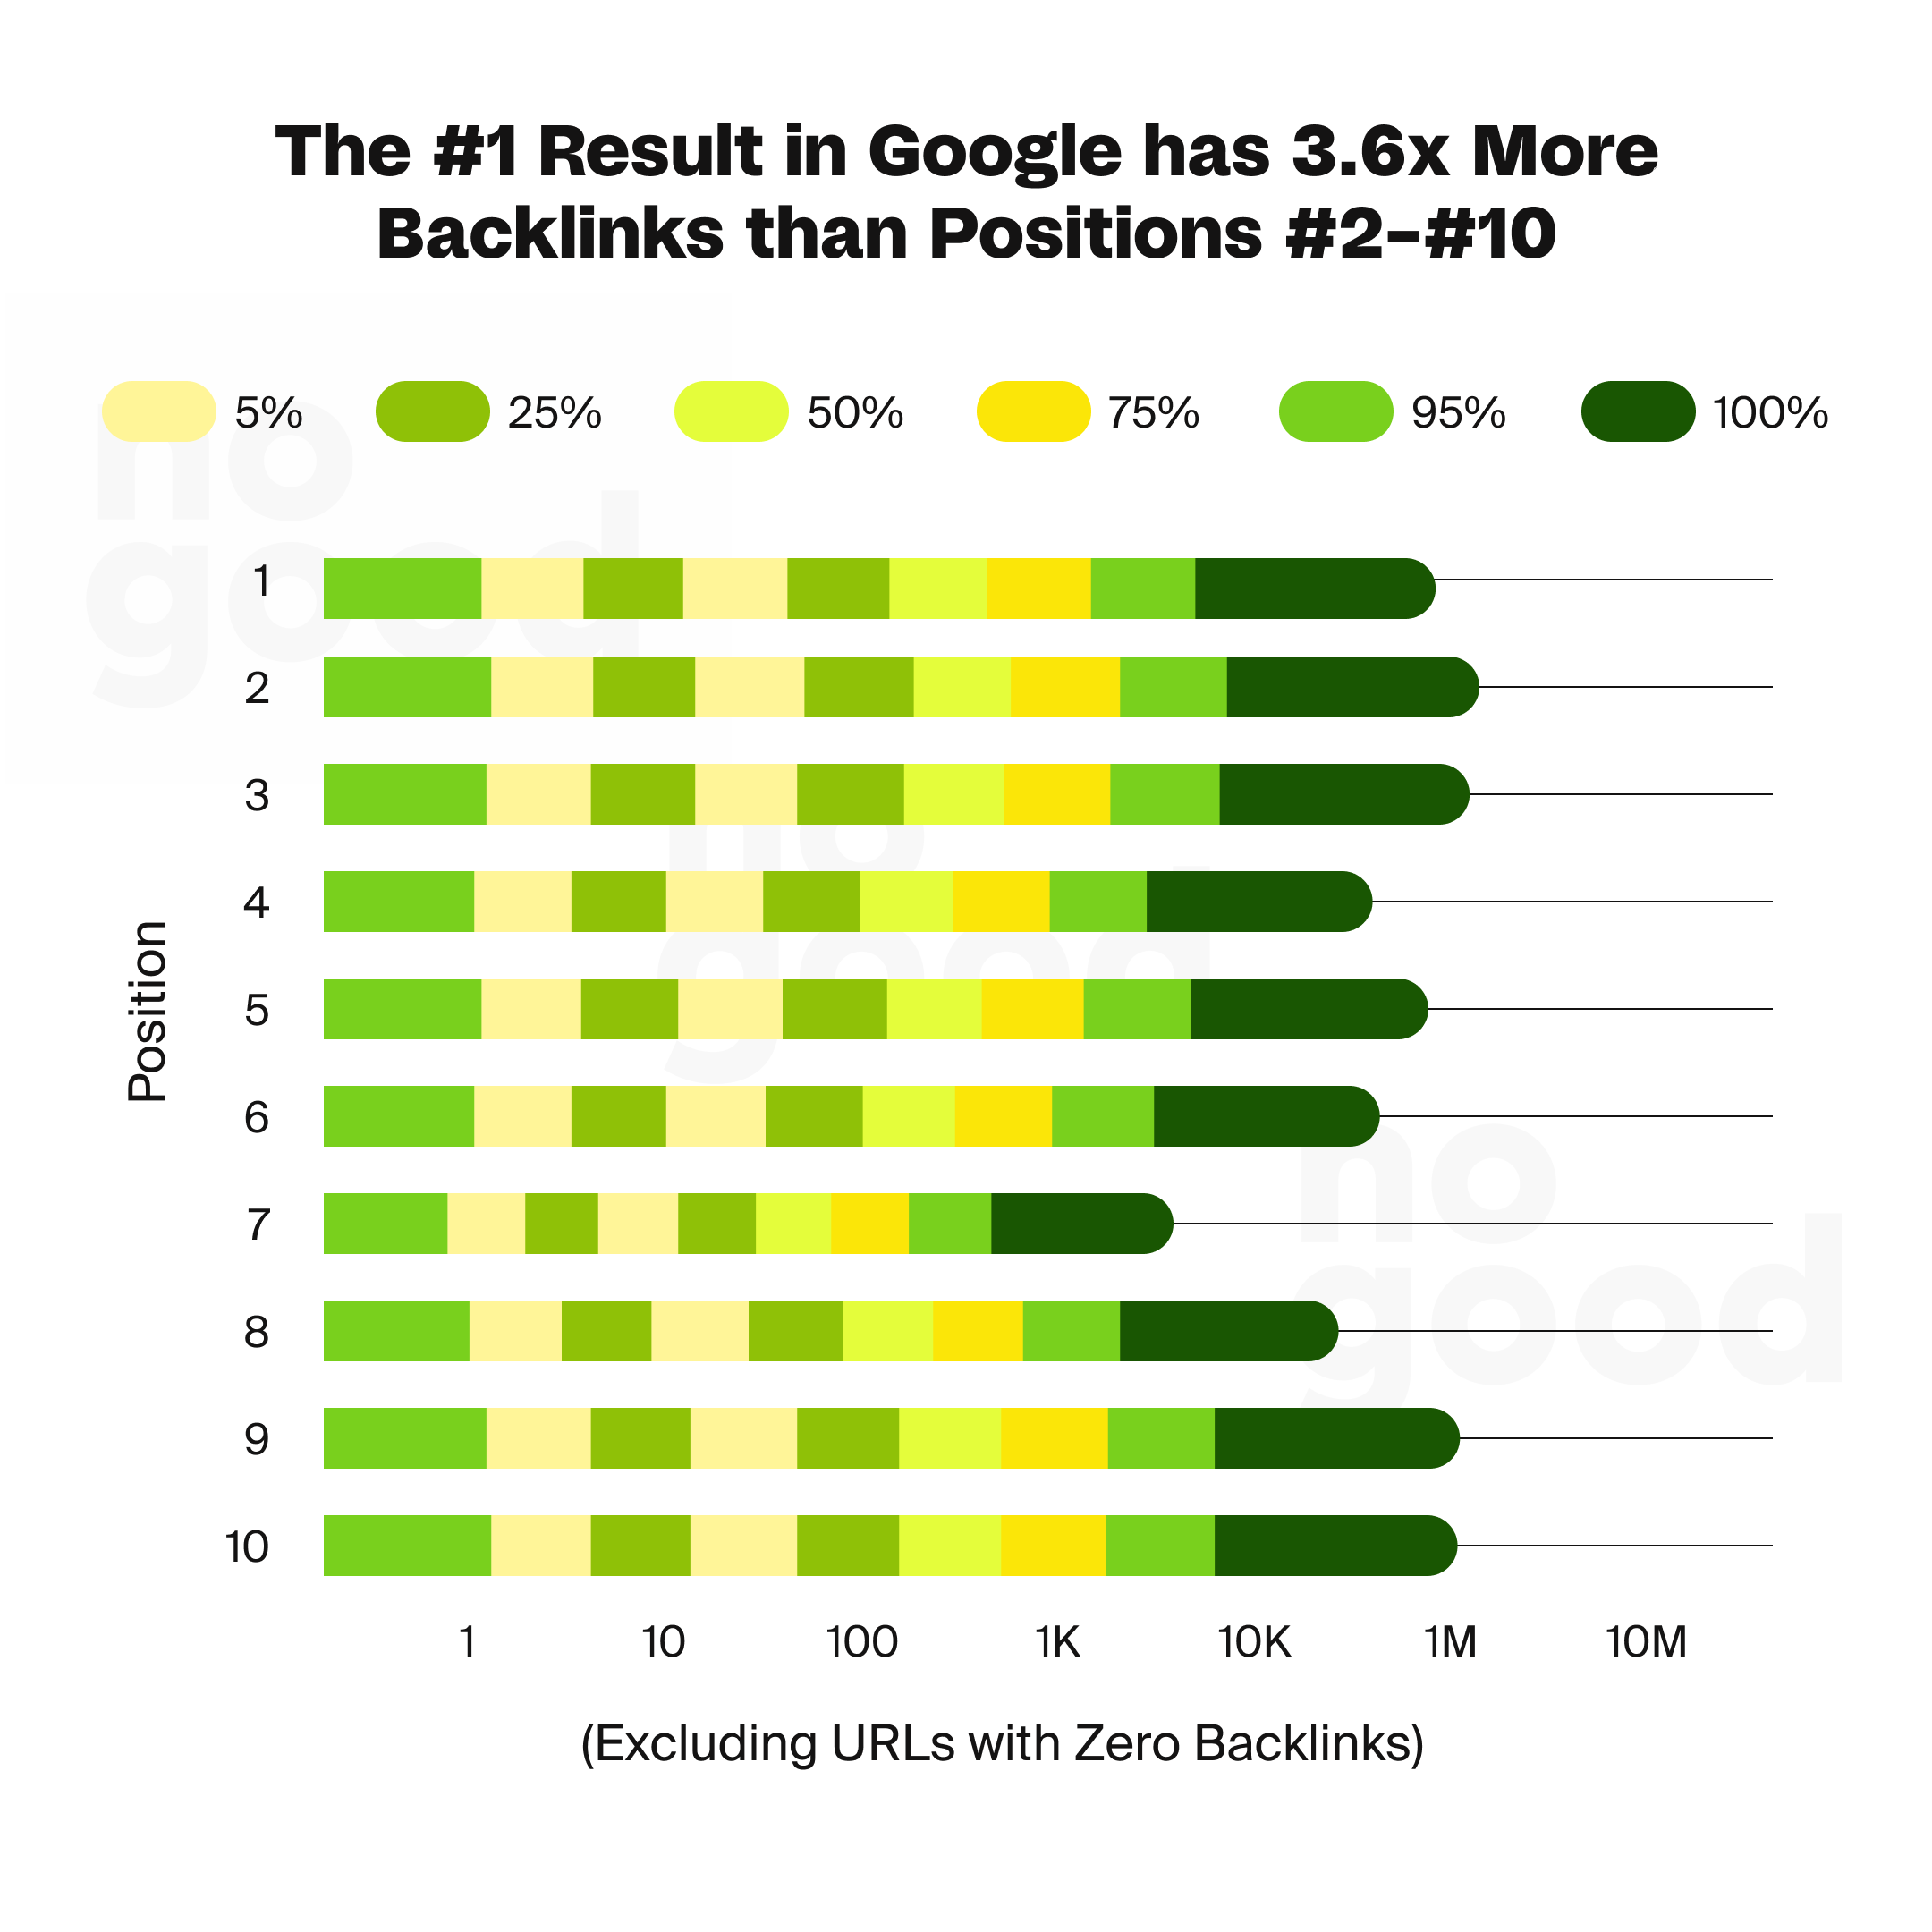 The number 1 result in Google has 3.6x more backlinks than positions 2 - 10.